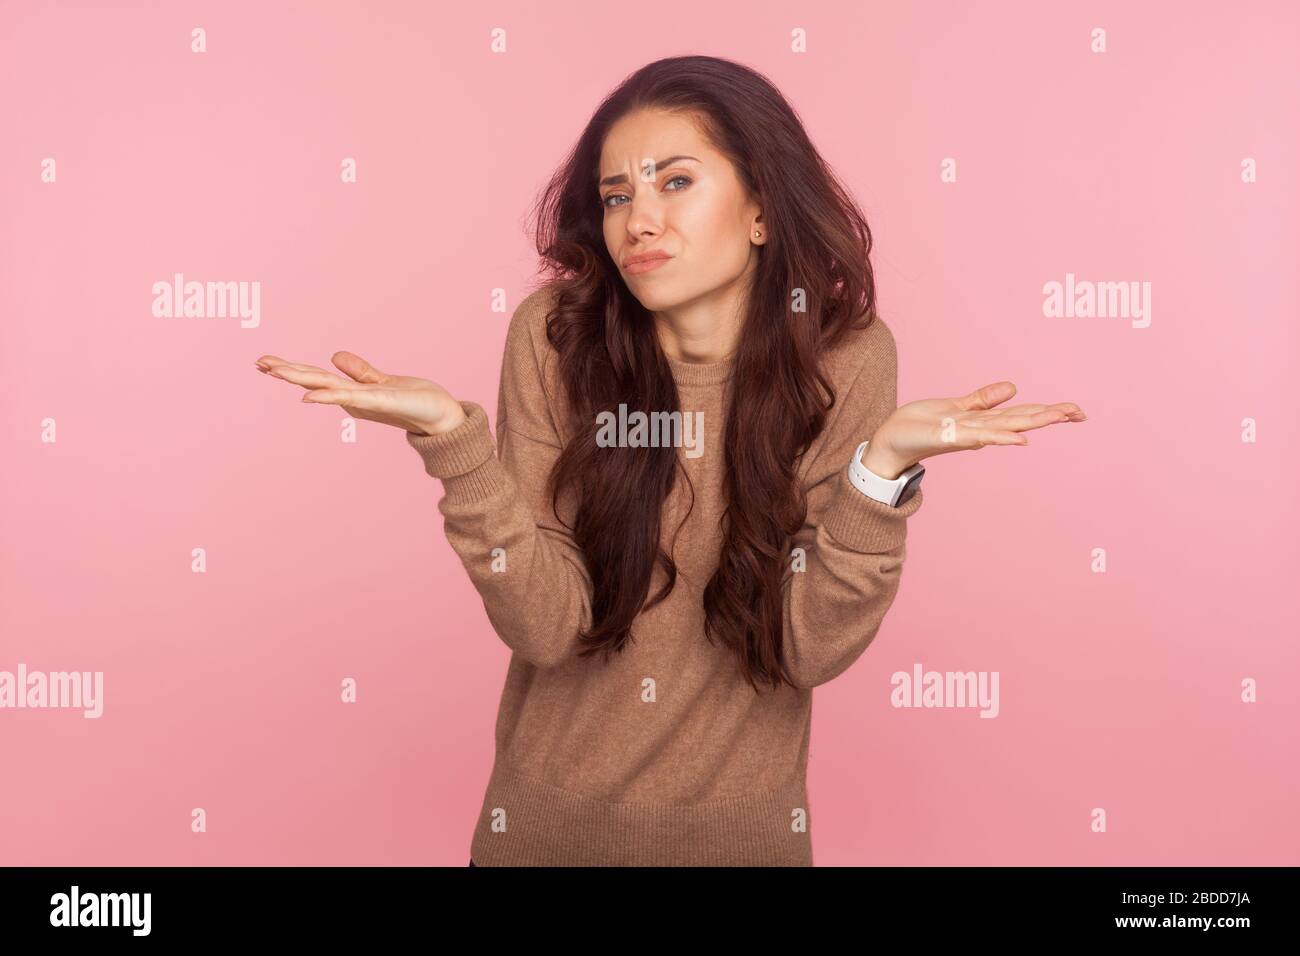 Don't know, maybe, who cares! Portrait of clueless confused young woman with brunette wavy hair looking embarrassed and disinterested in question, hes Stock Photo